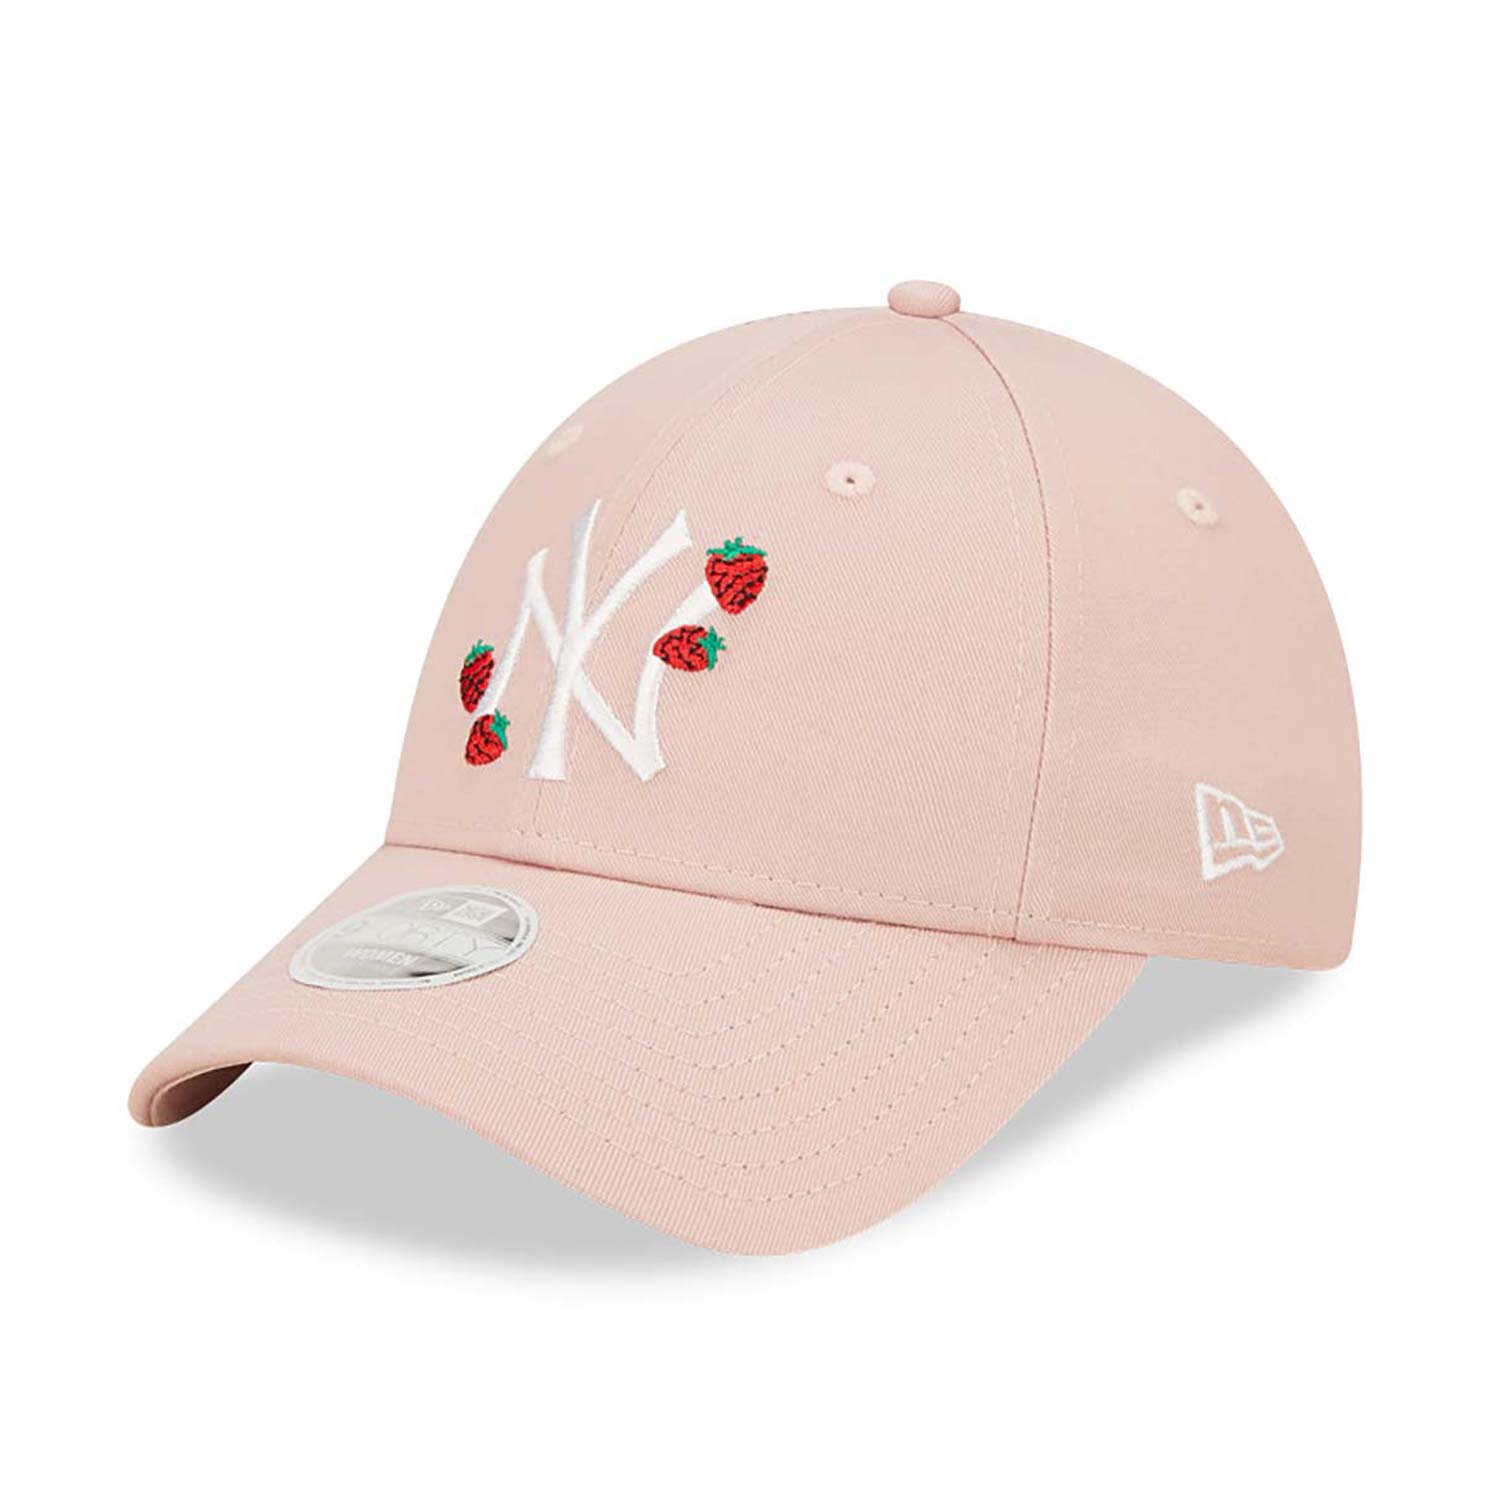 Women's pink New York Yankees baseball cap featuring a strawberry patches on the logo